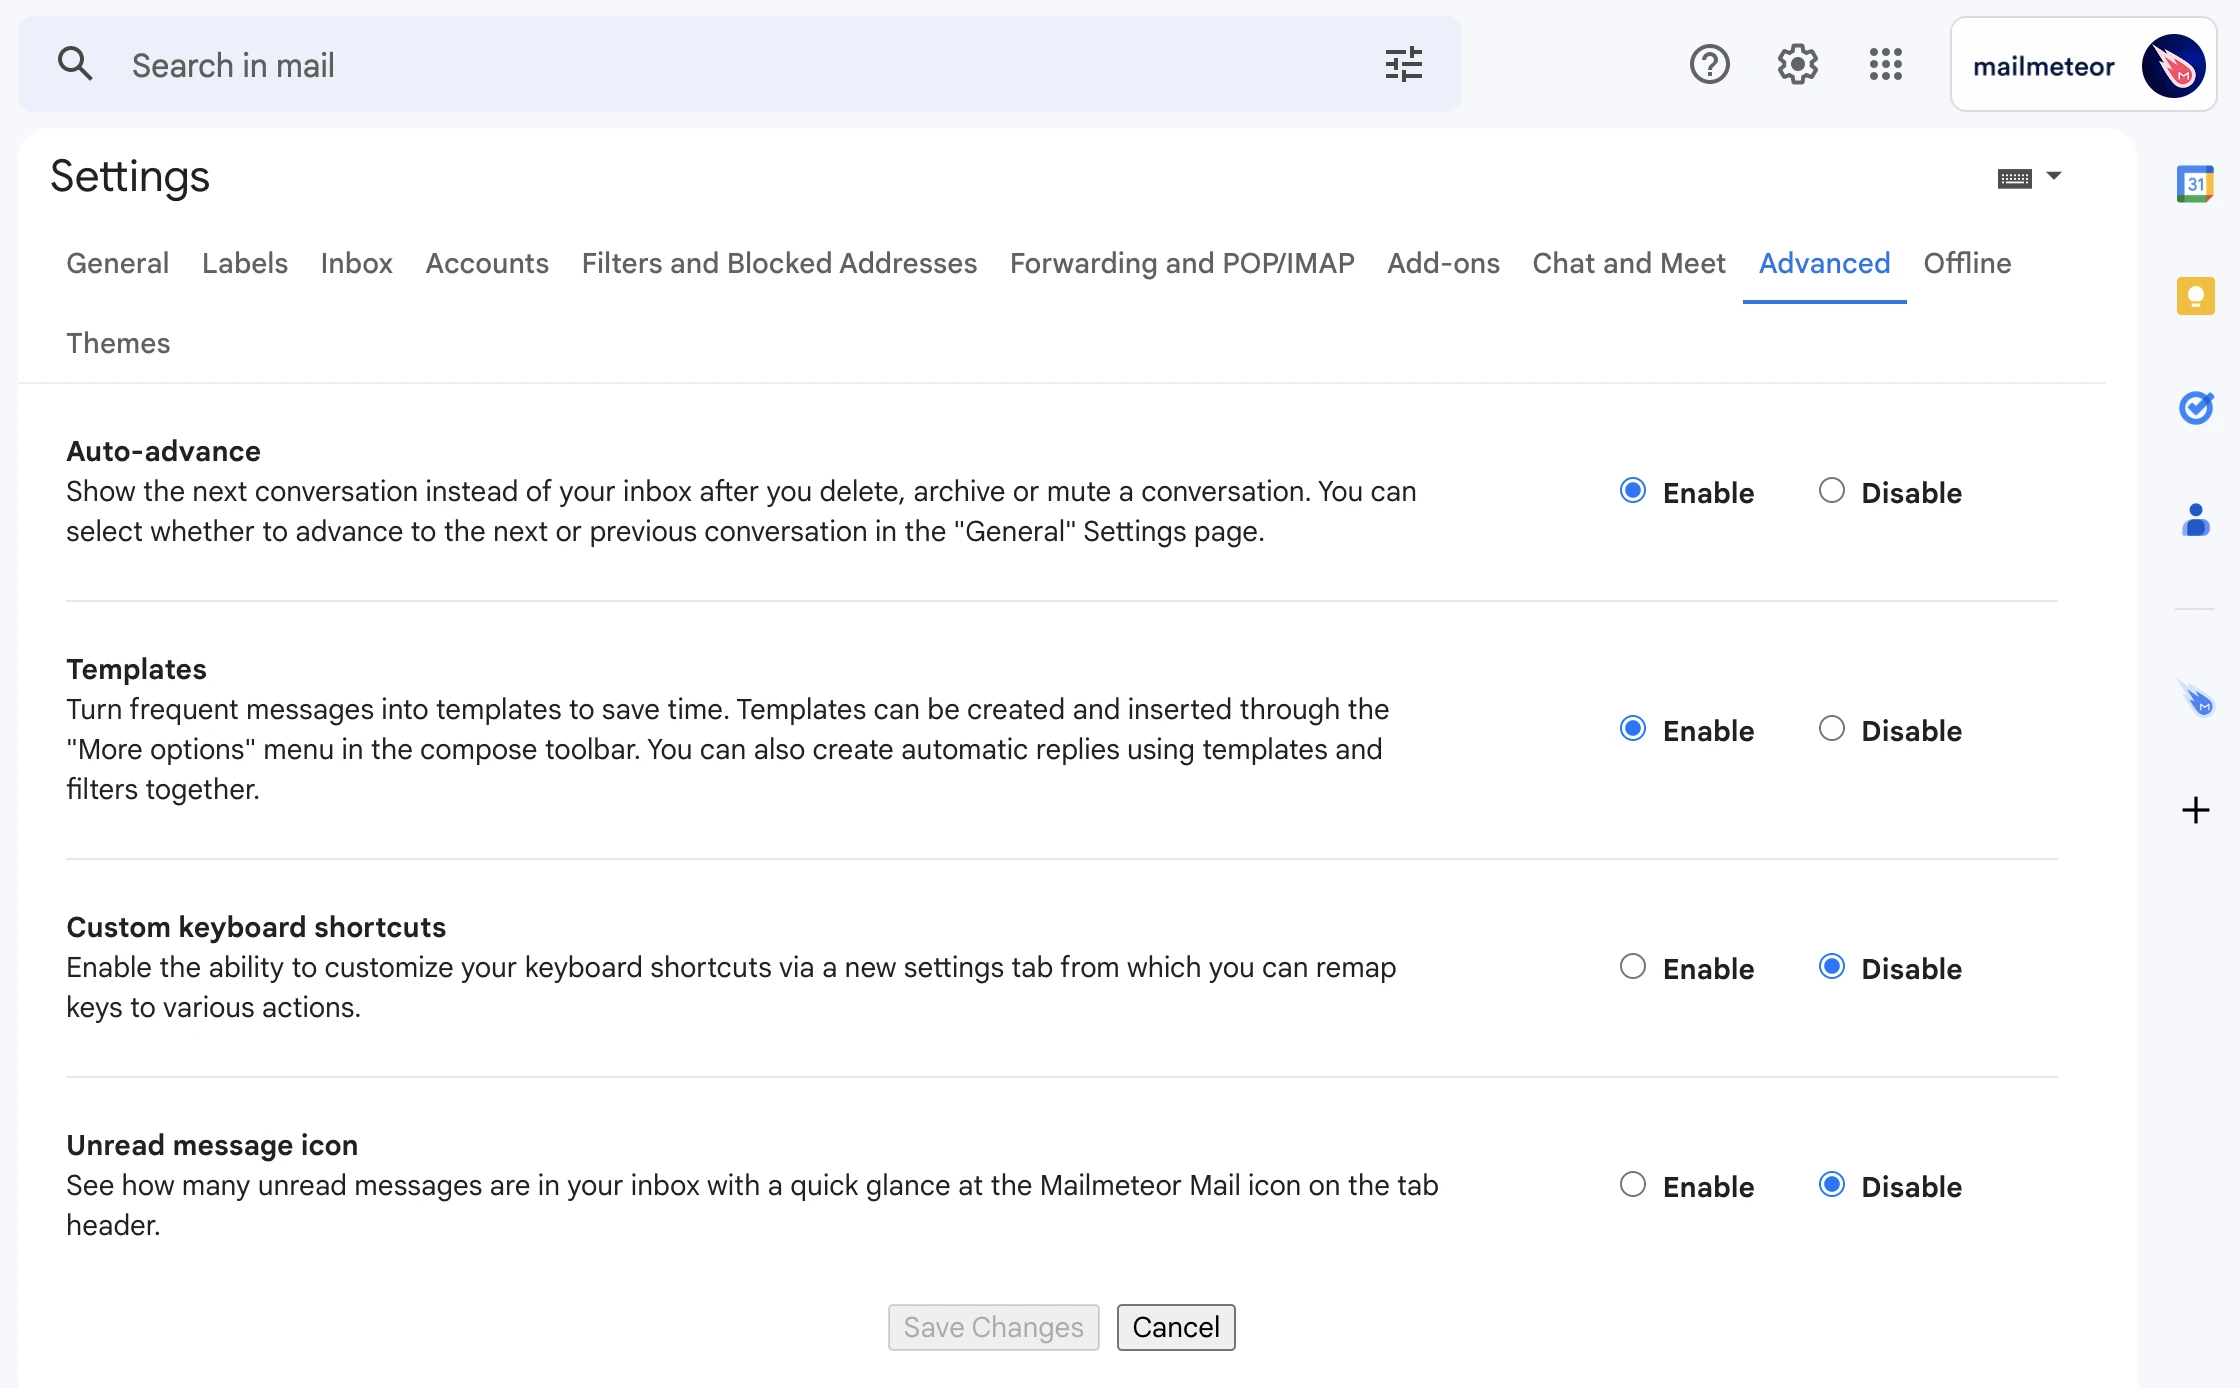 Gmail's advanced features